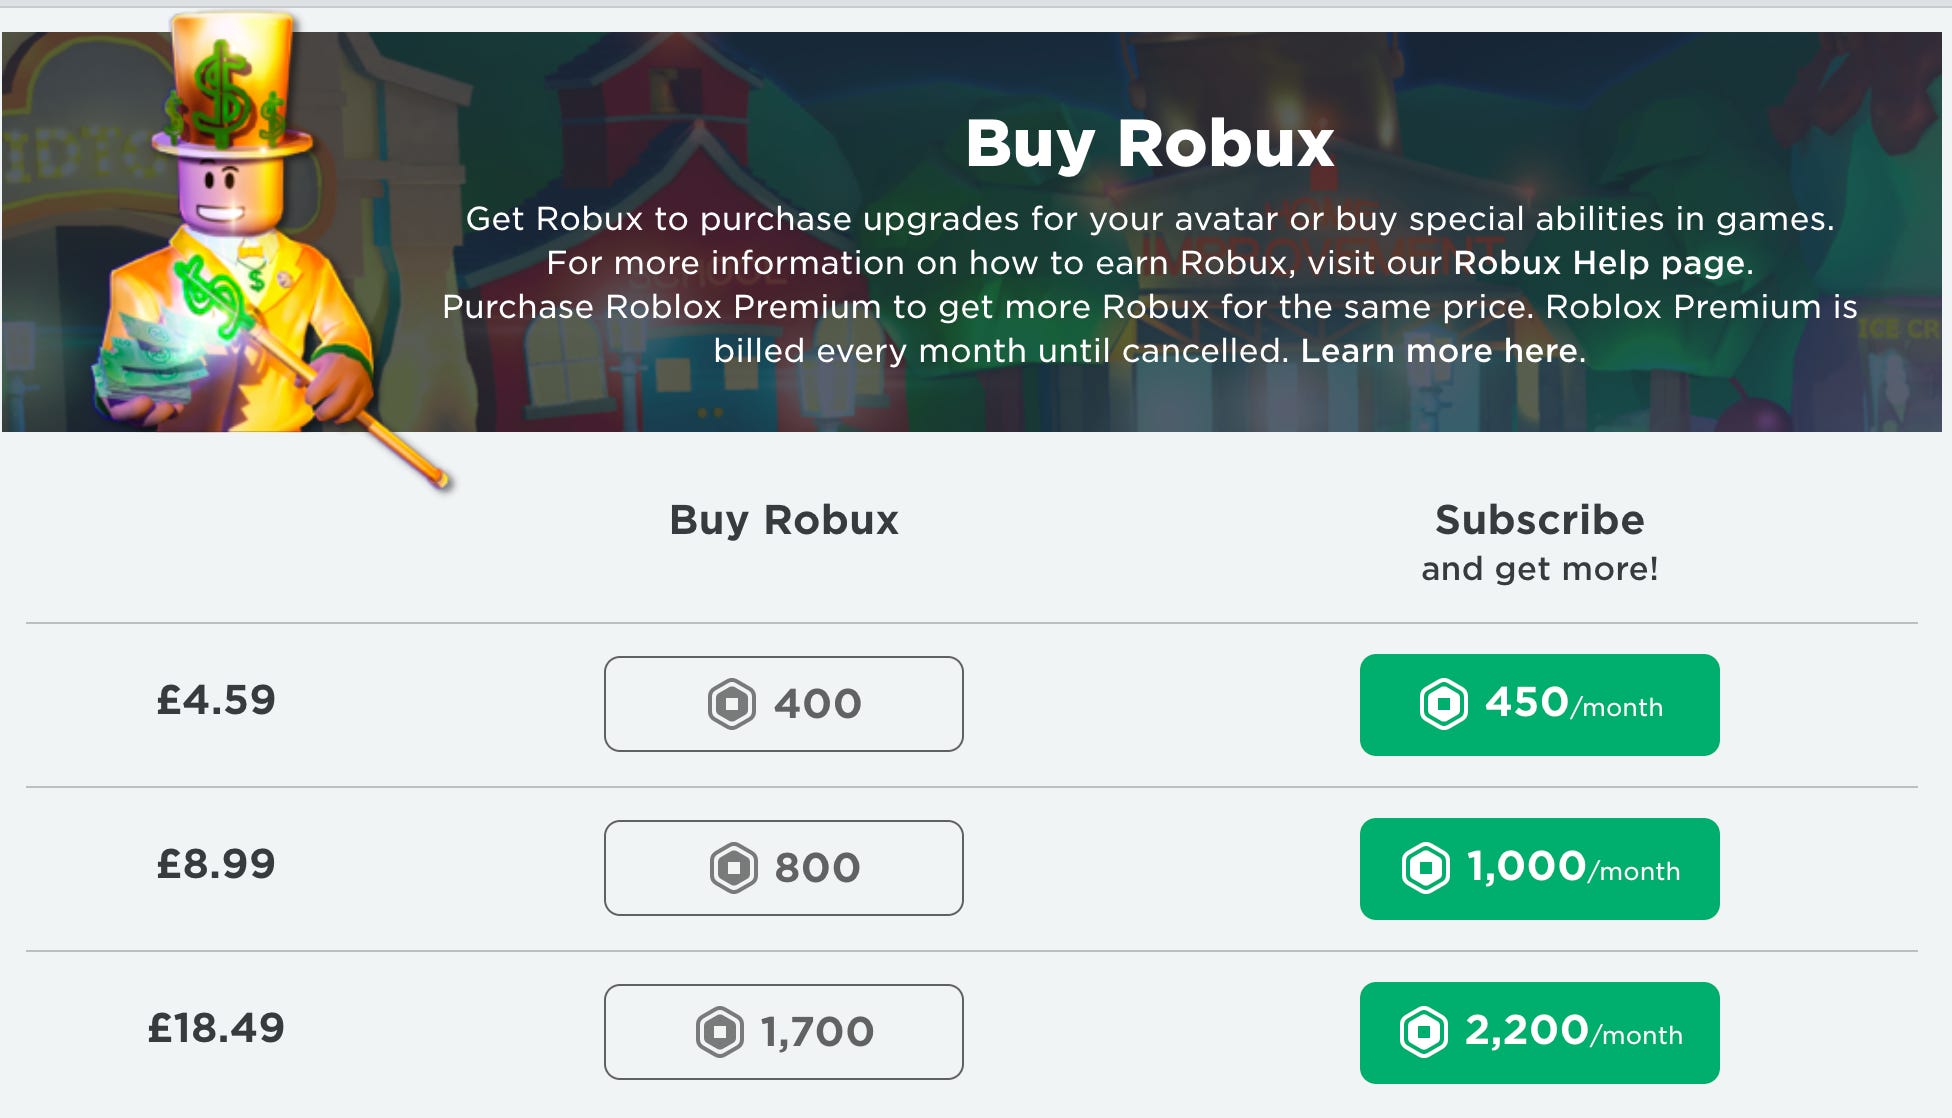 1 Robux equals 0.01 USD - wide 1